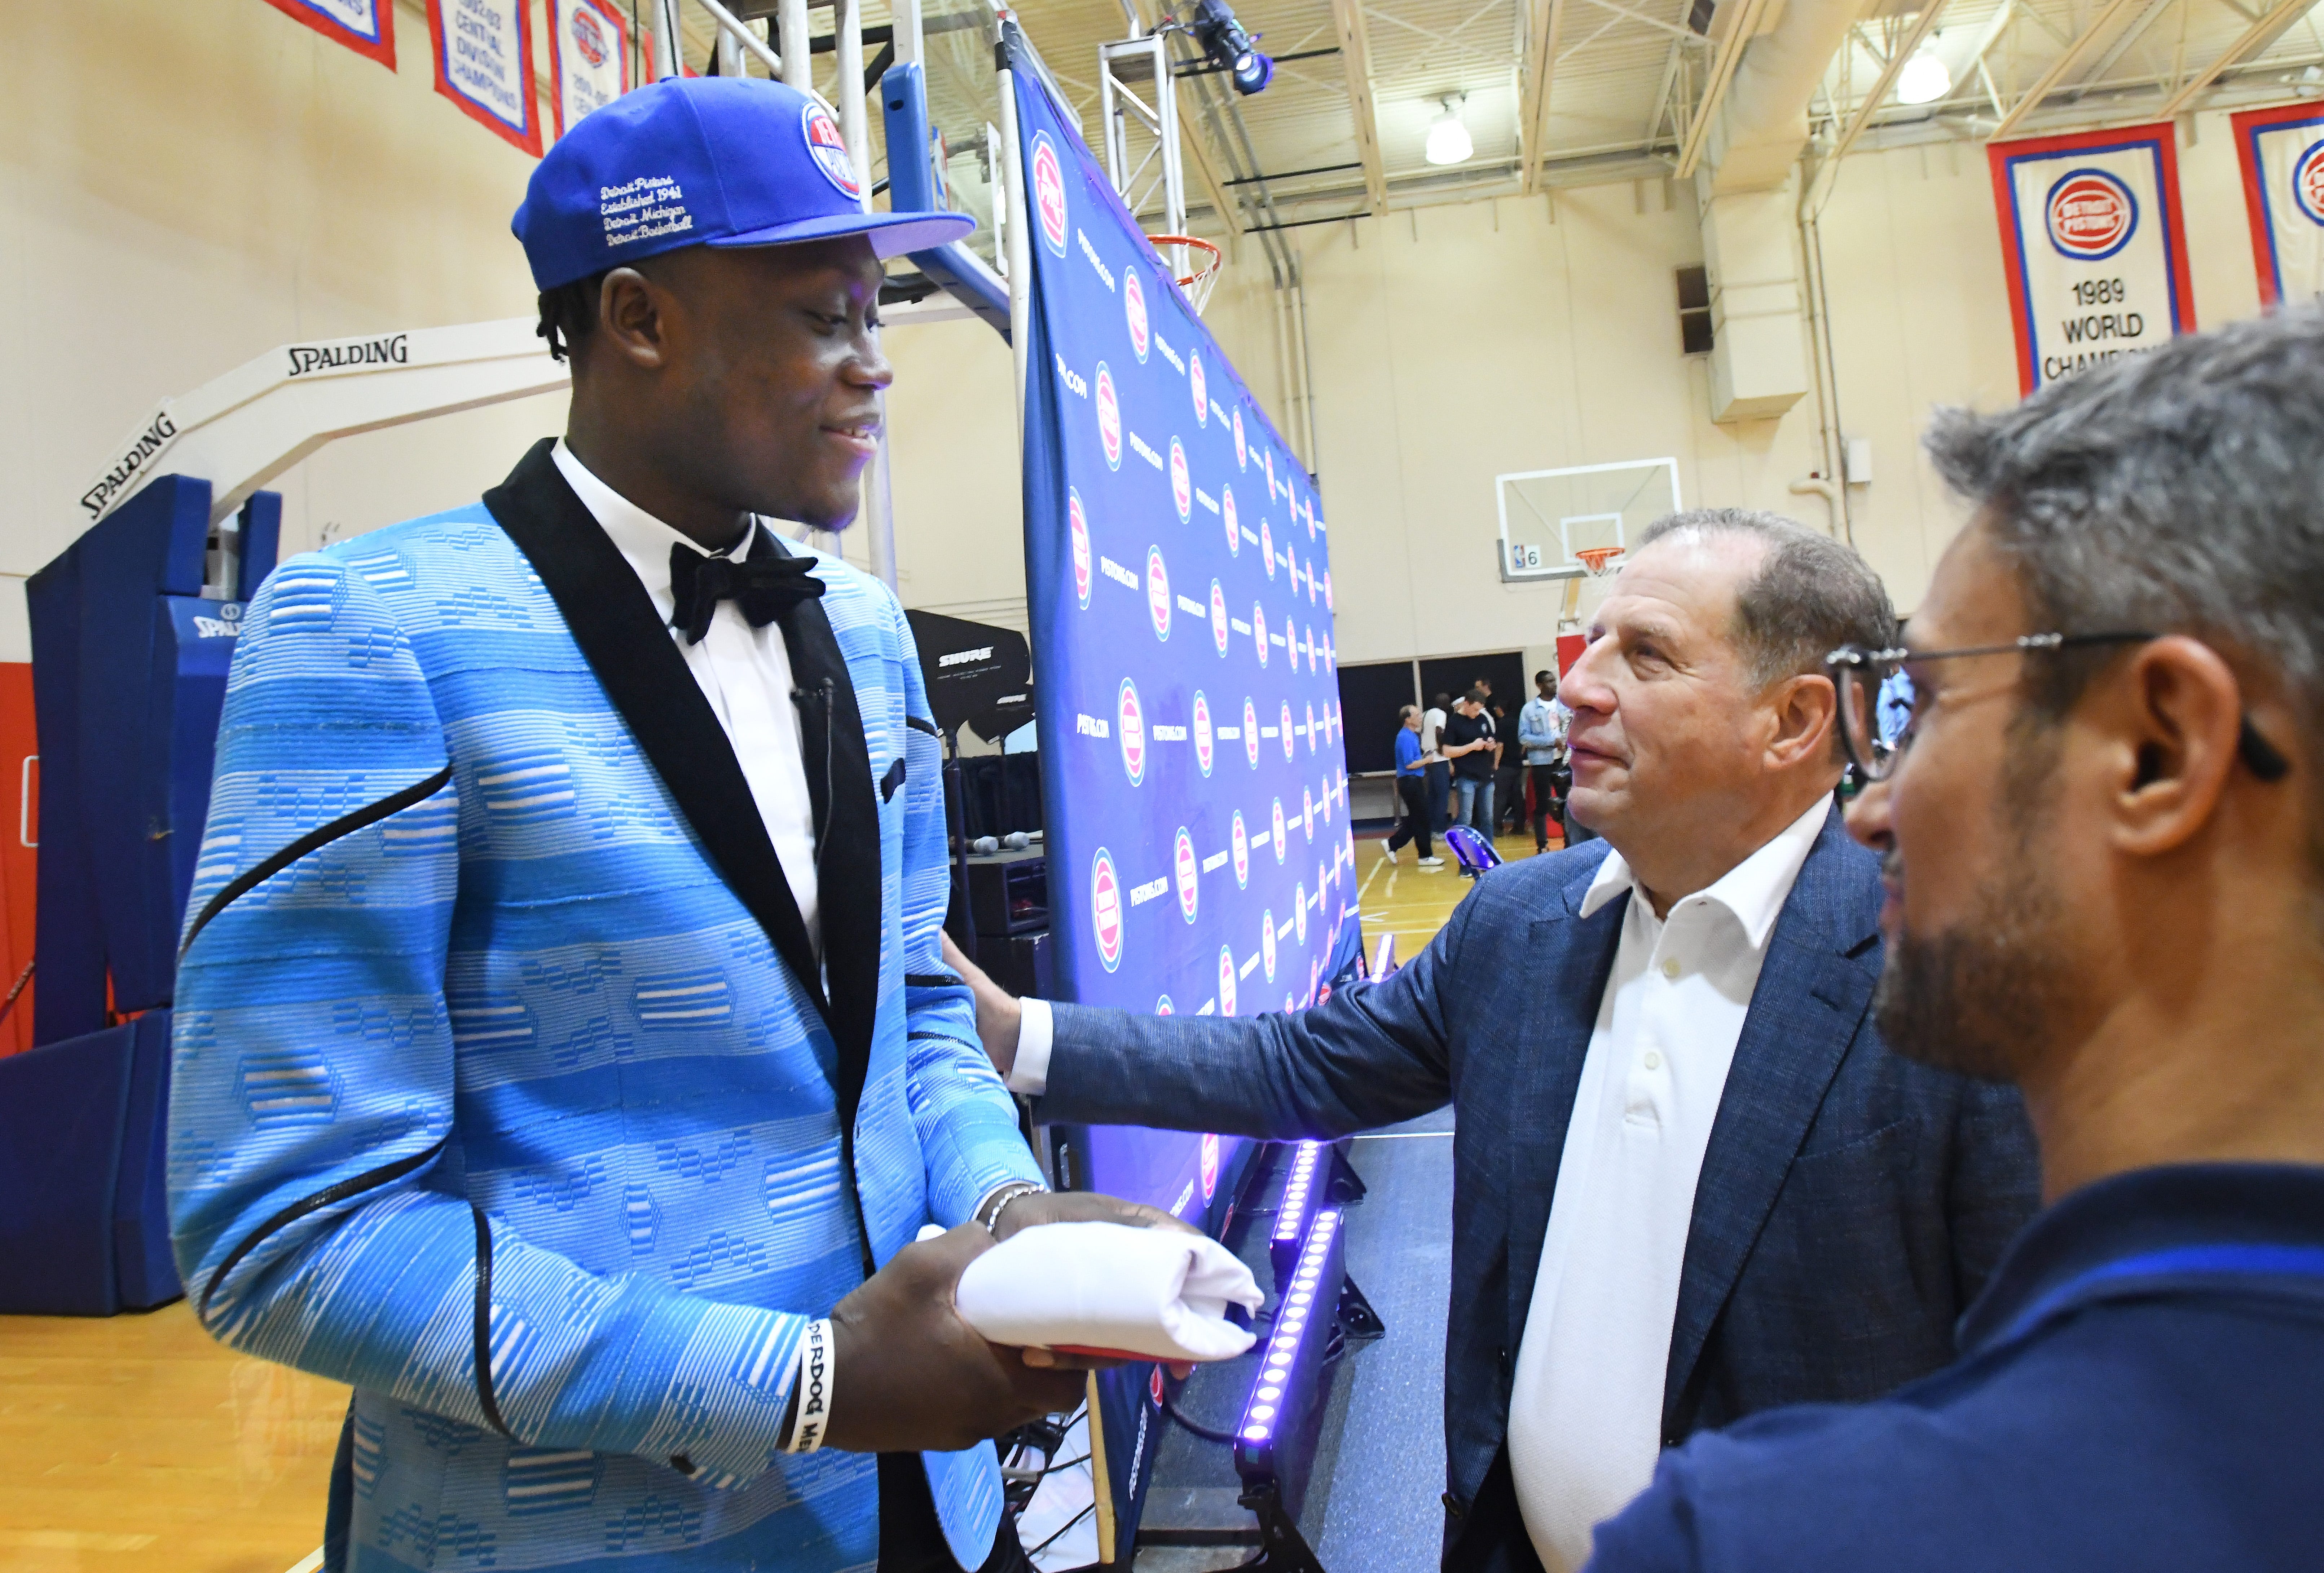 Pistons first round draft pick Sekou Doumbouya is greeted by Vice Chairman of Palace Sports & Entertainment Arn Tellem after the press conference.